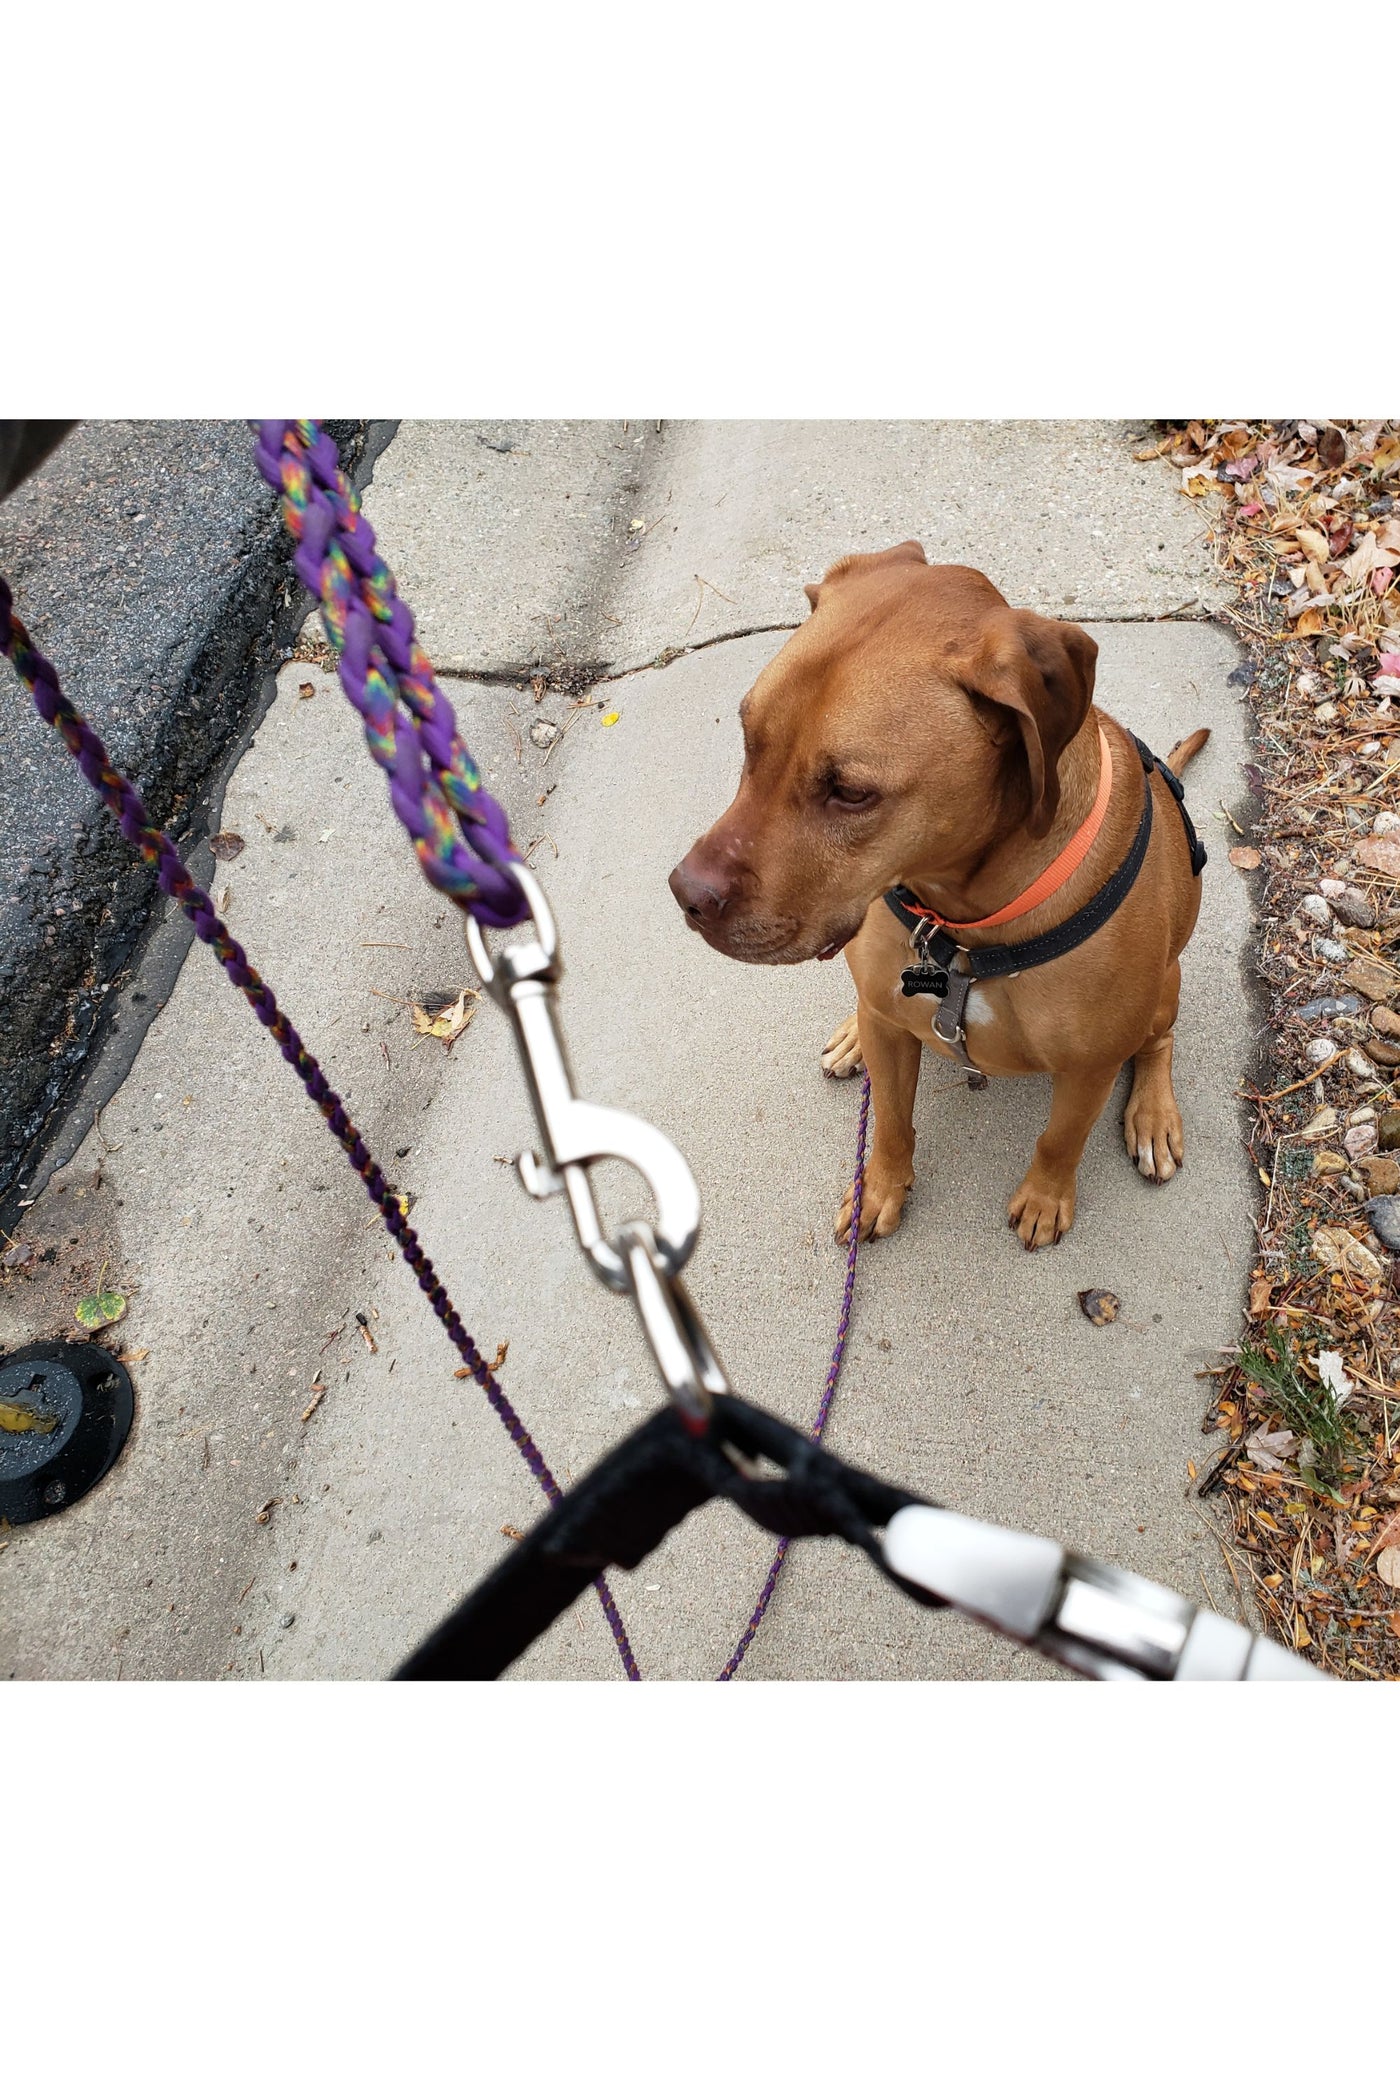 An apricot colored dog sitting in the background while the dog walker holds up the end of the leash connected to the waist belt for a close up photograph.